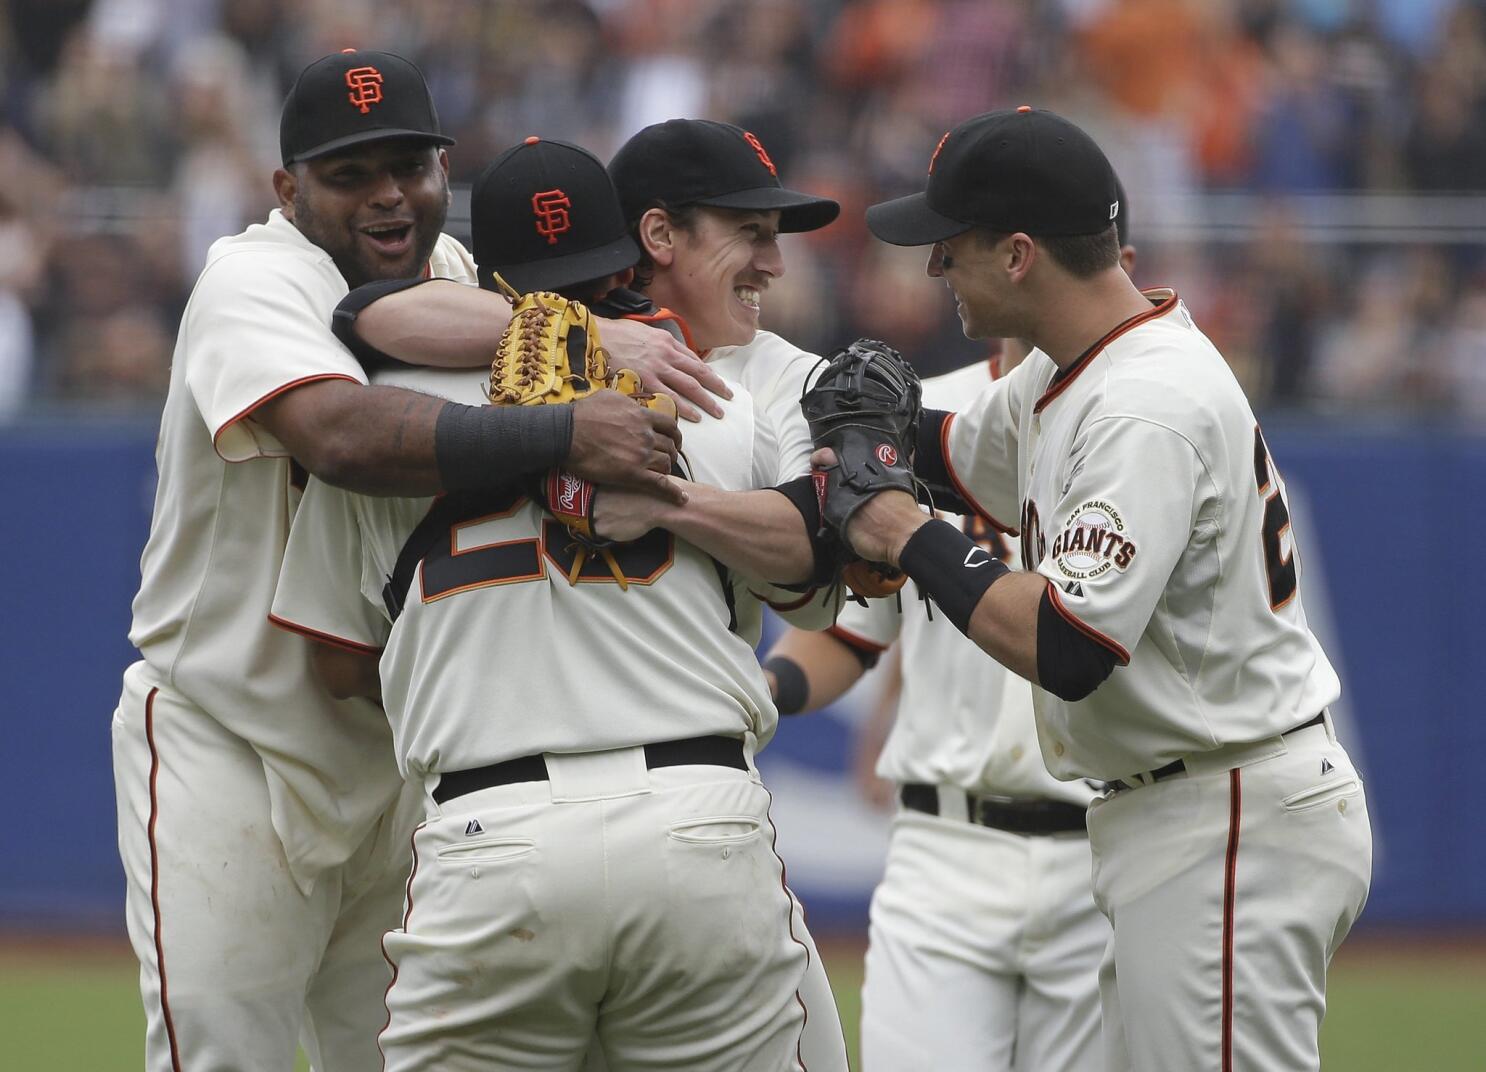 Tim Lincecum and the no-no: No-hitters are still fun to watch